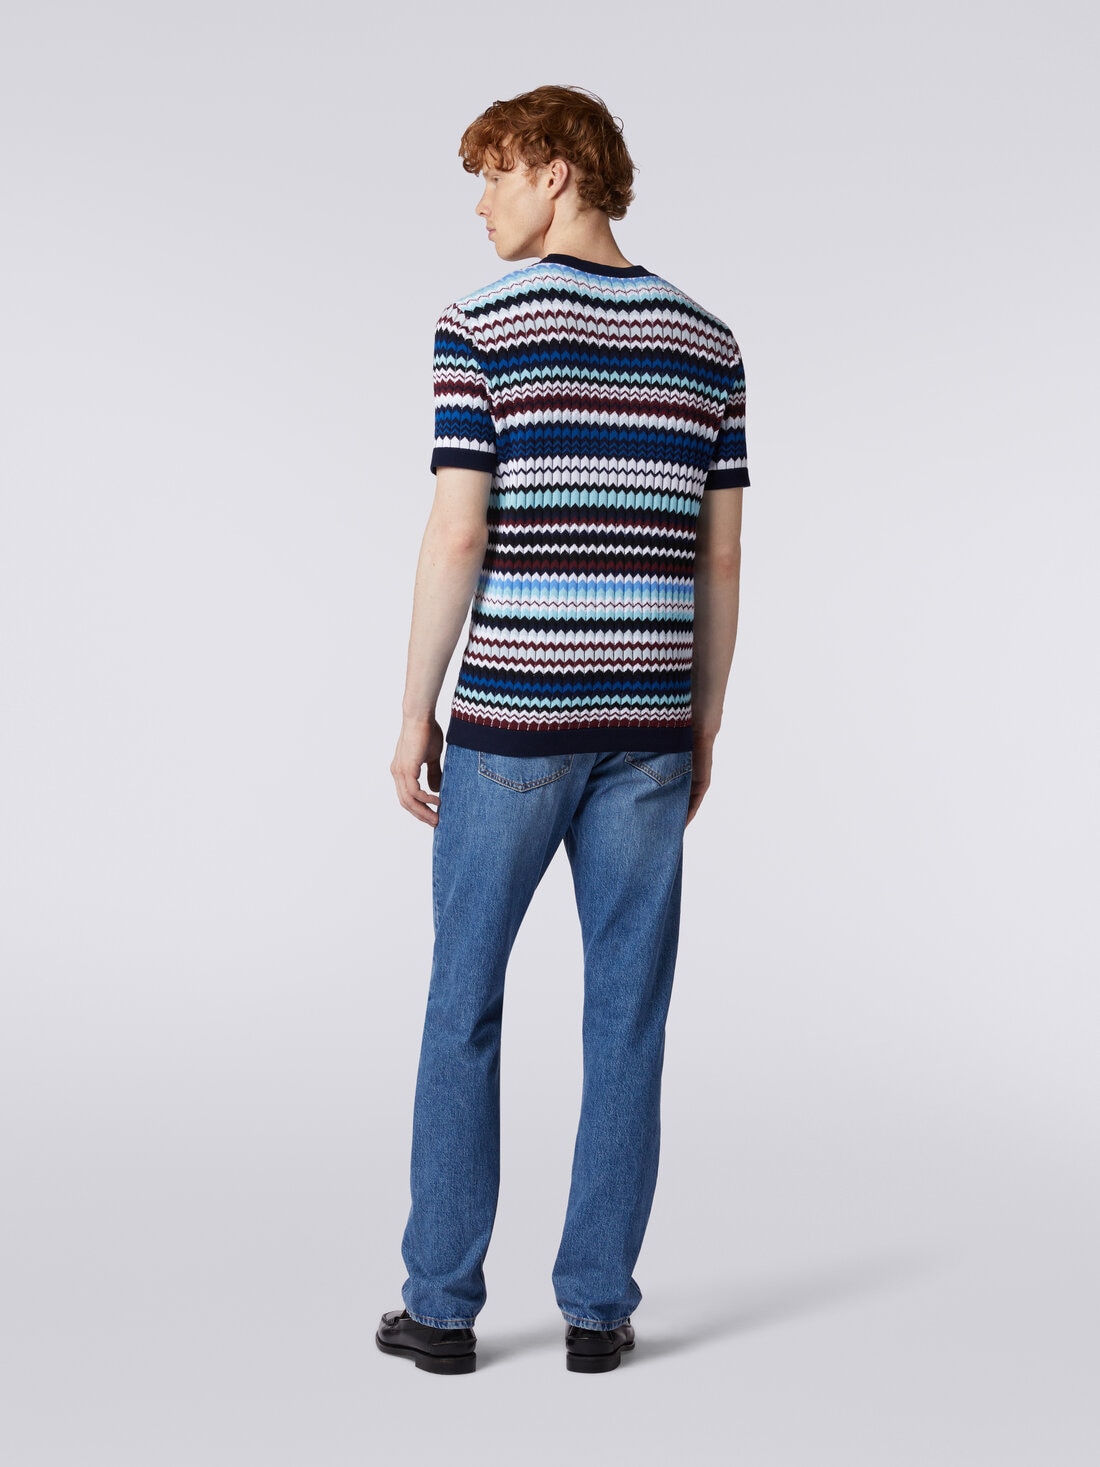 T-shirt in ribbed zigzag cotton knit, Multicoloured  - US24SL0DBK034NS72EY - 3